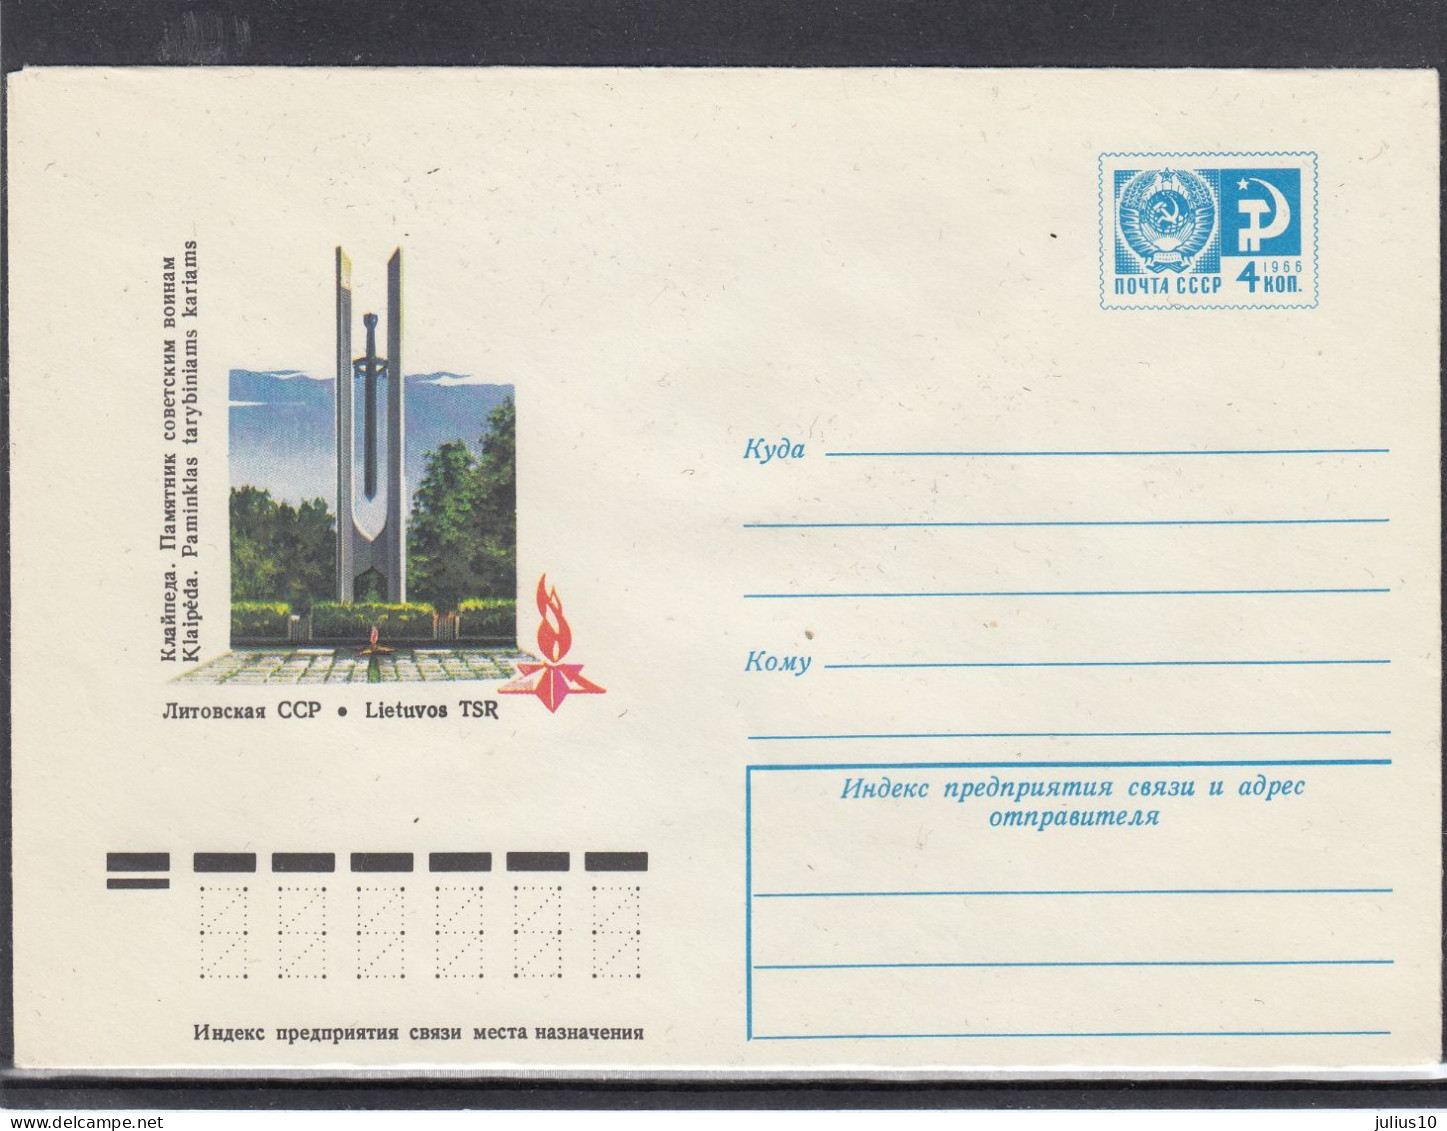 LITHUANIA (USSR) 1977 Cover Klaipeda WWII Monument #LTV81 - Lithuania